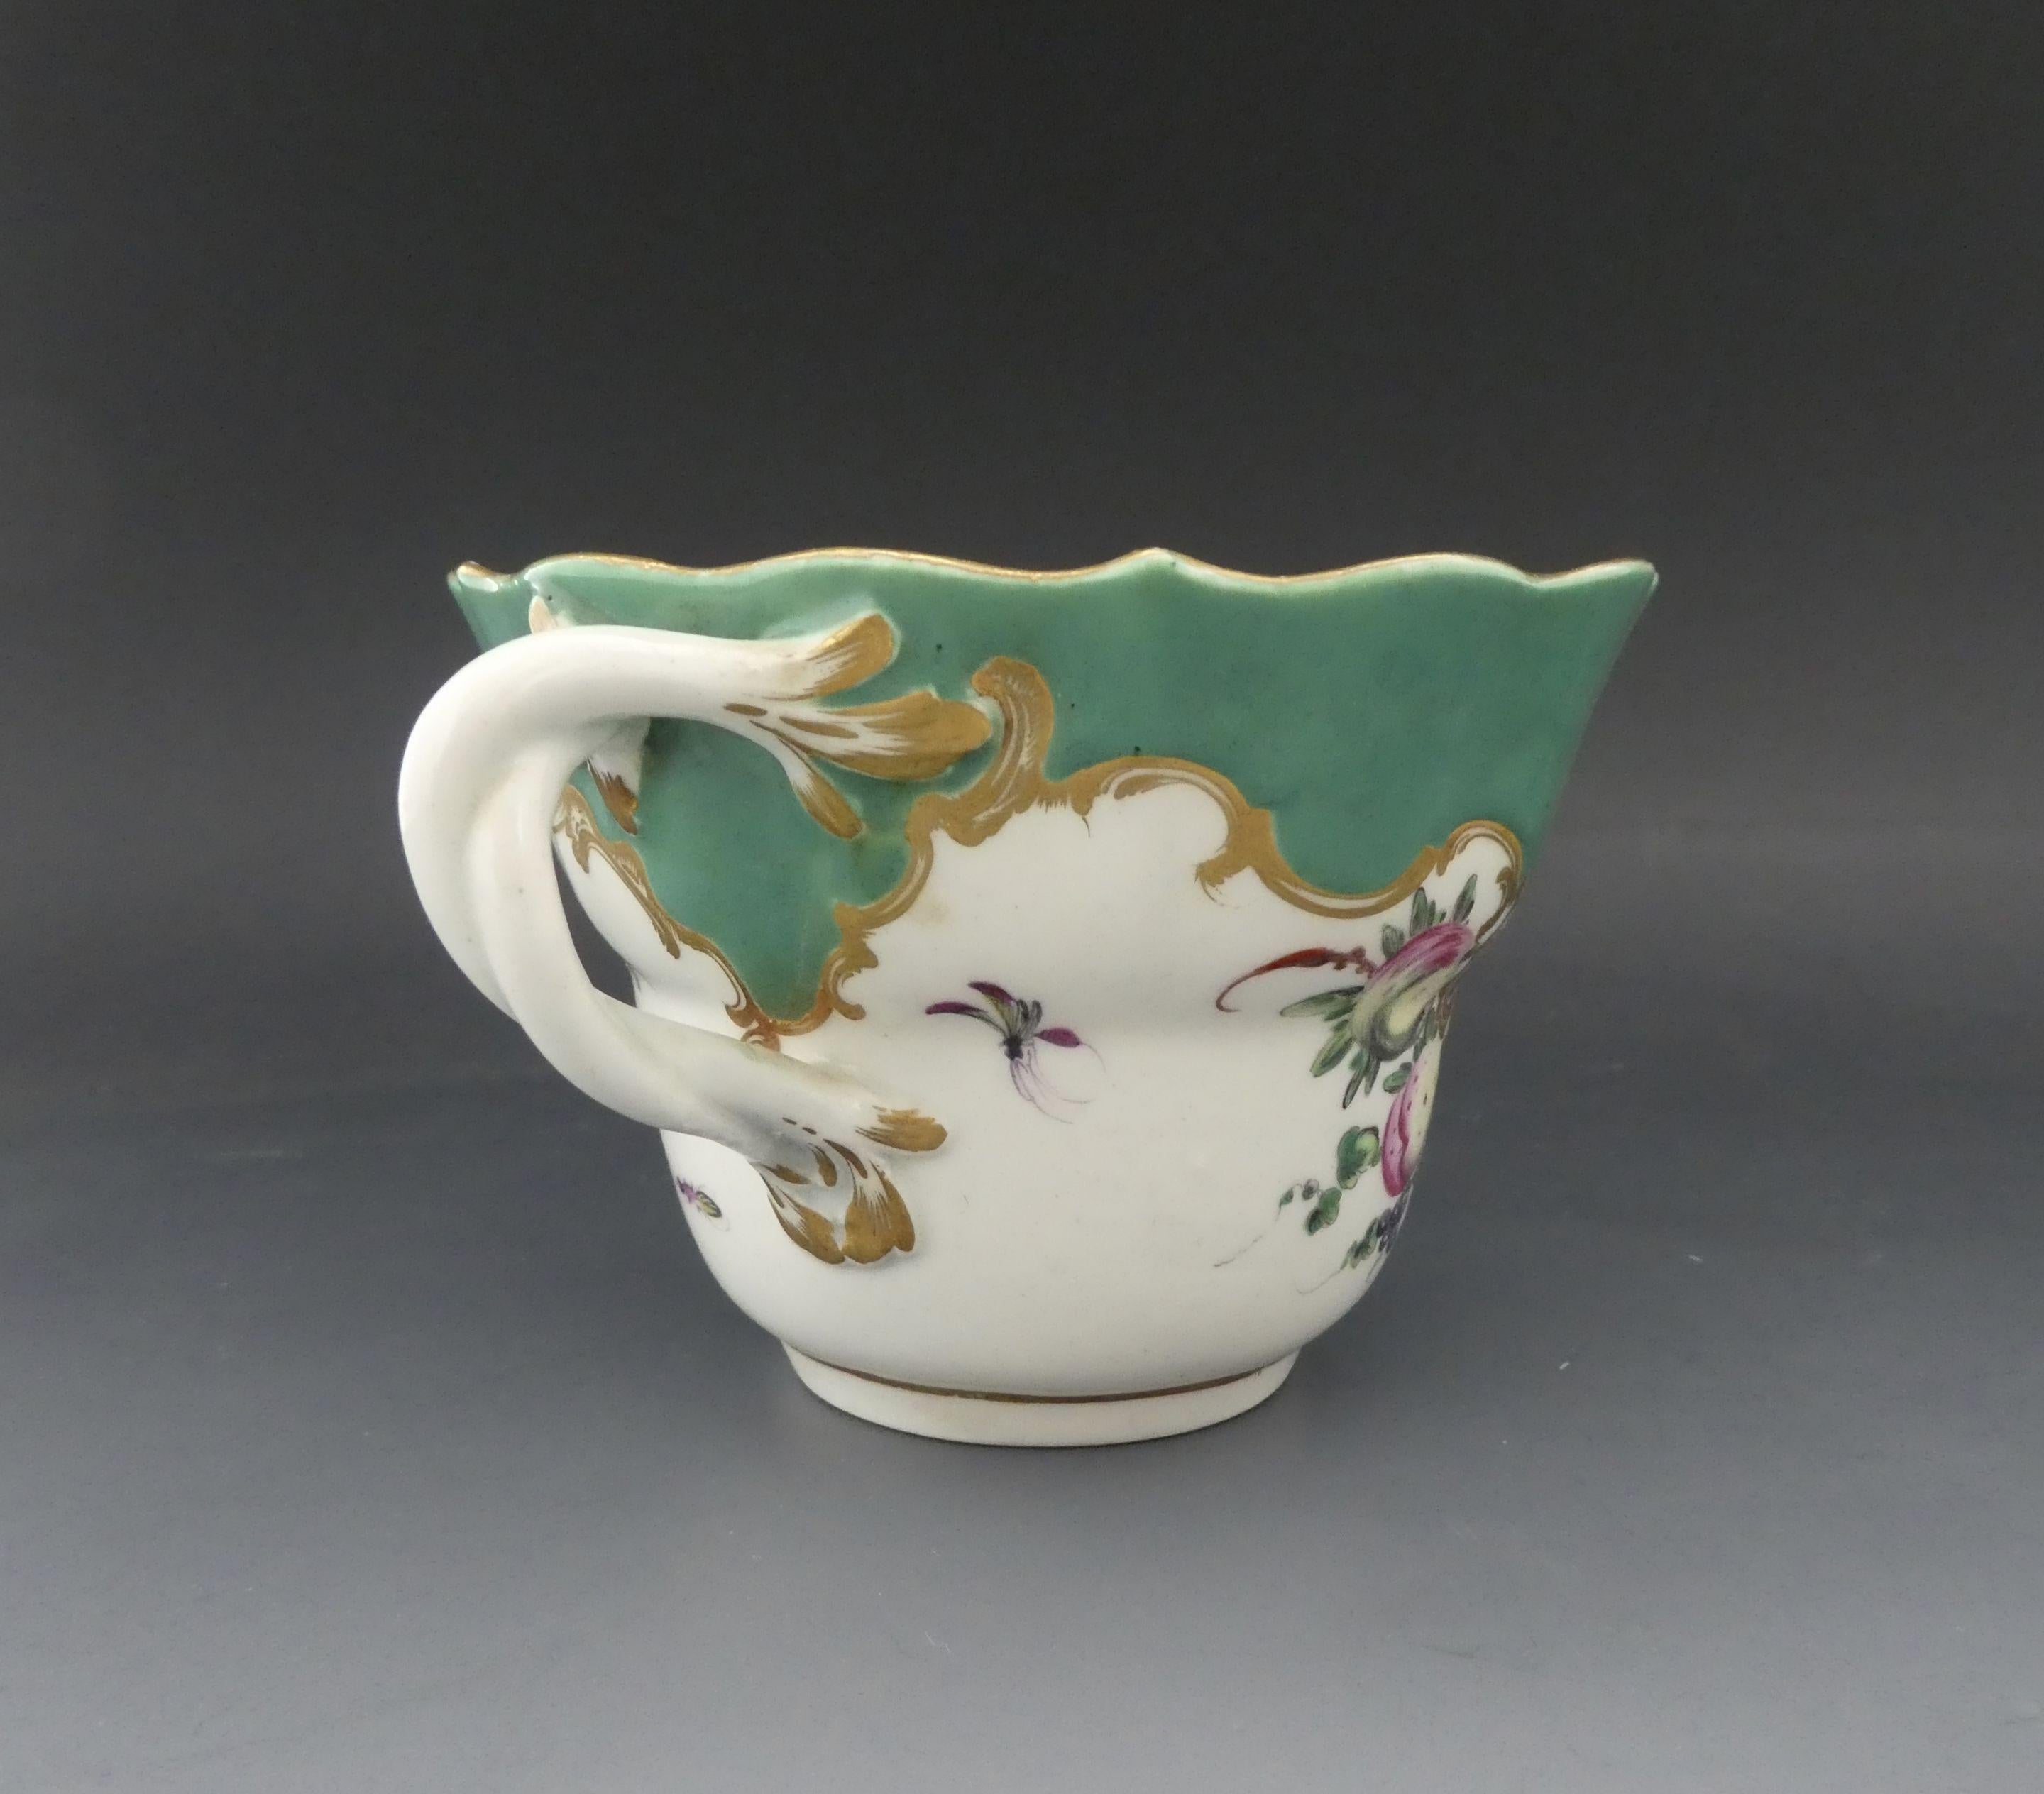 Ceramic Worcester Porcelain Chocolate Cup and Saucer, ‘Spotted Fruit’ Painter